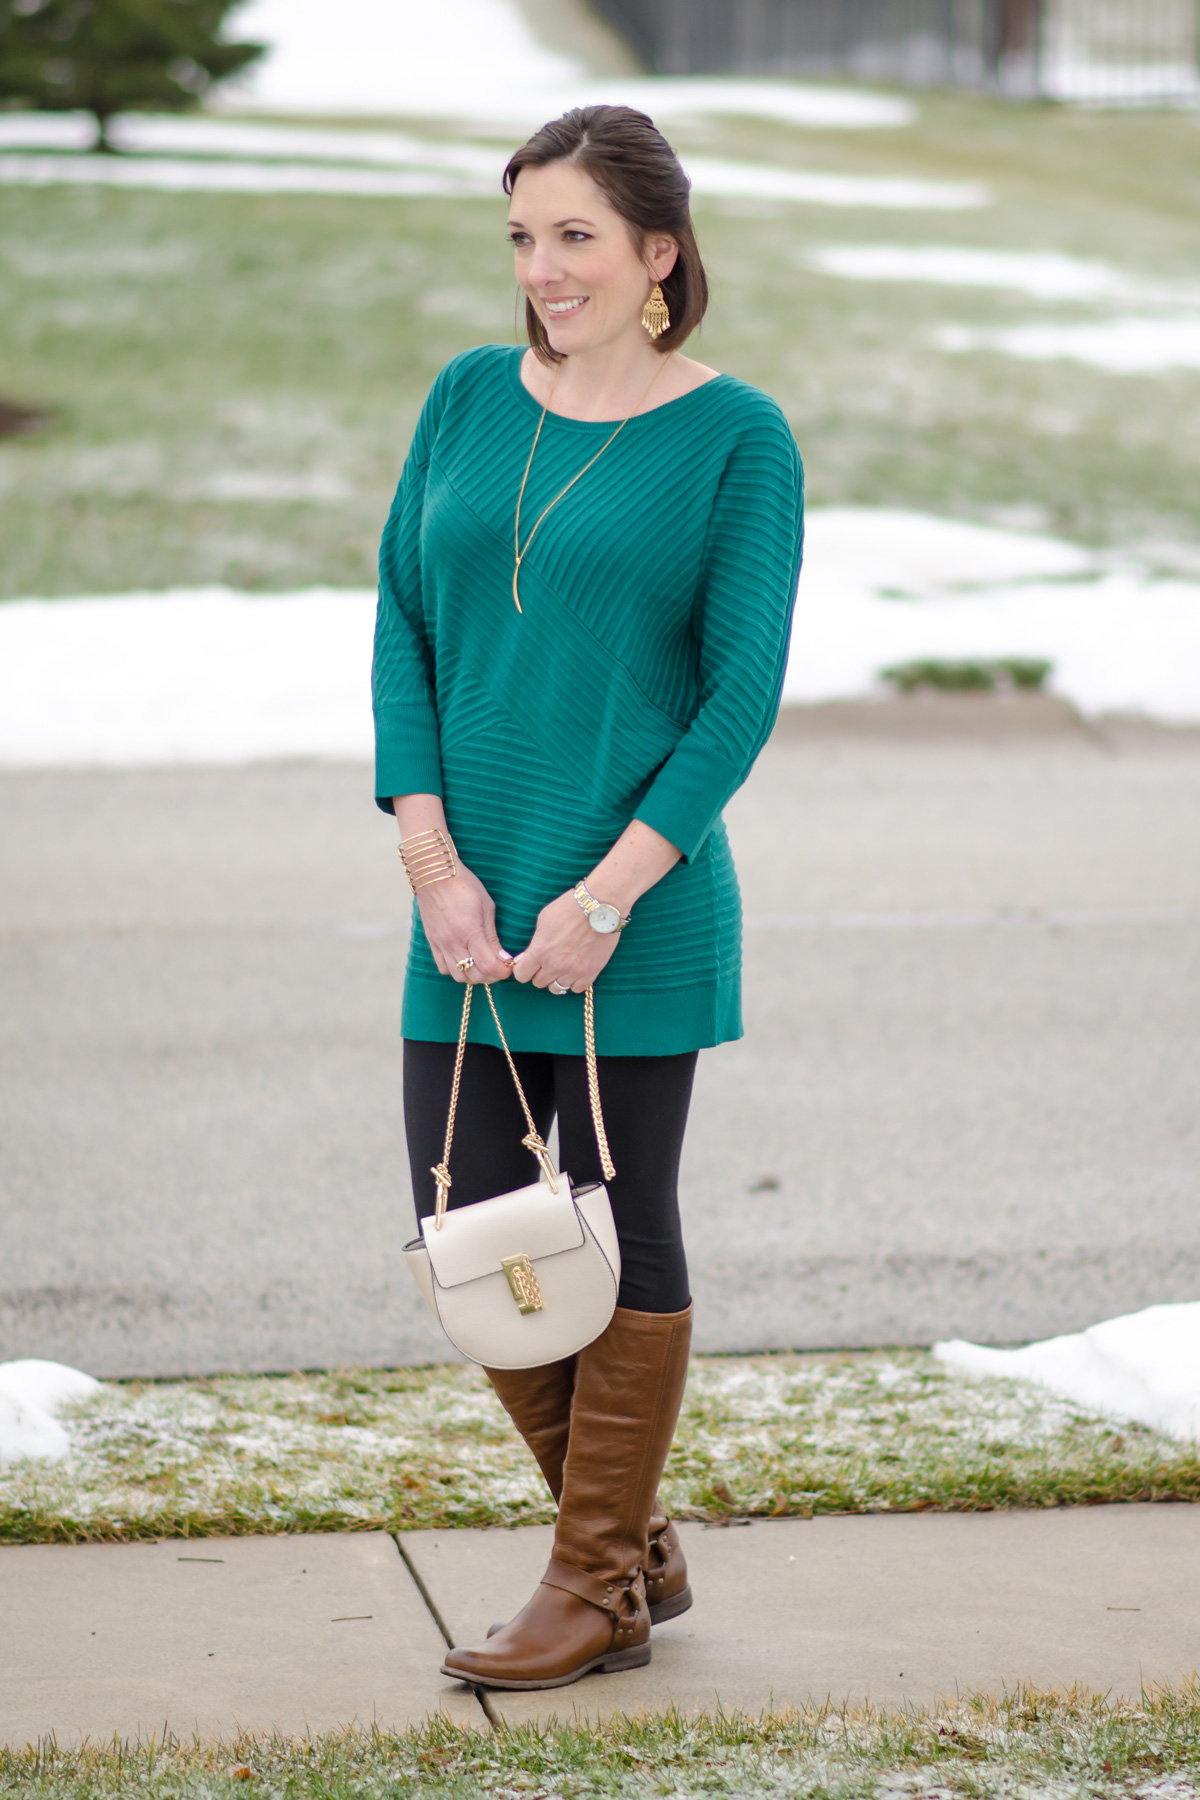 Spring Fashion for Women Over 40: green tunic, black leggings, brown Frye riding boots